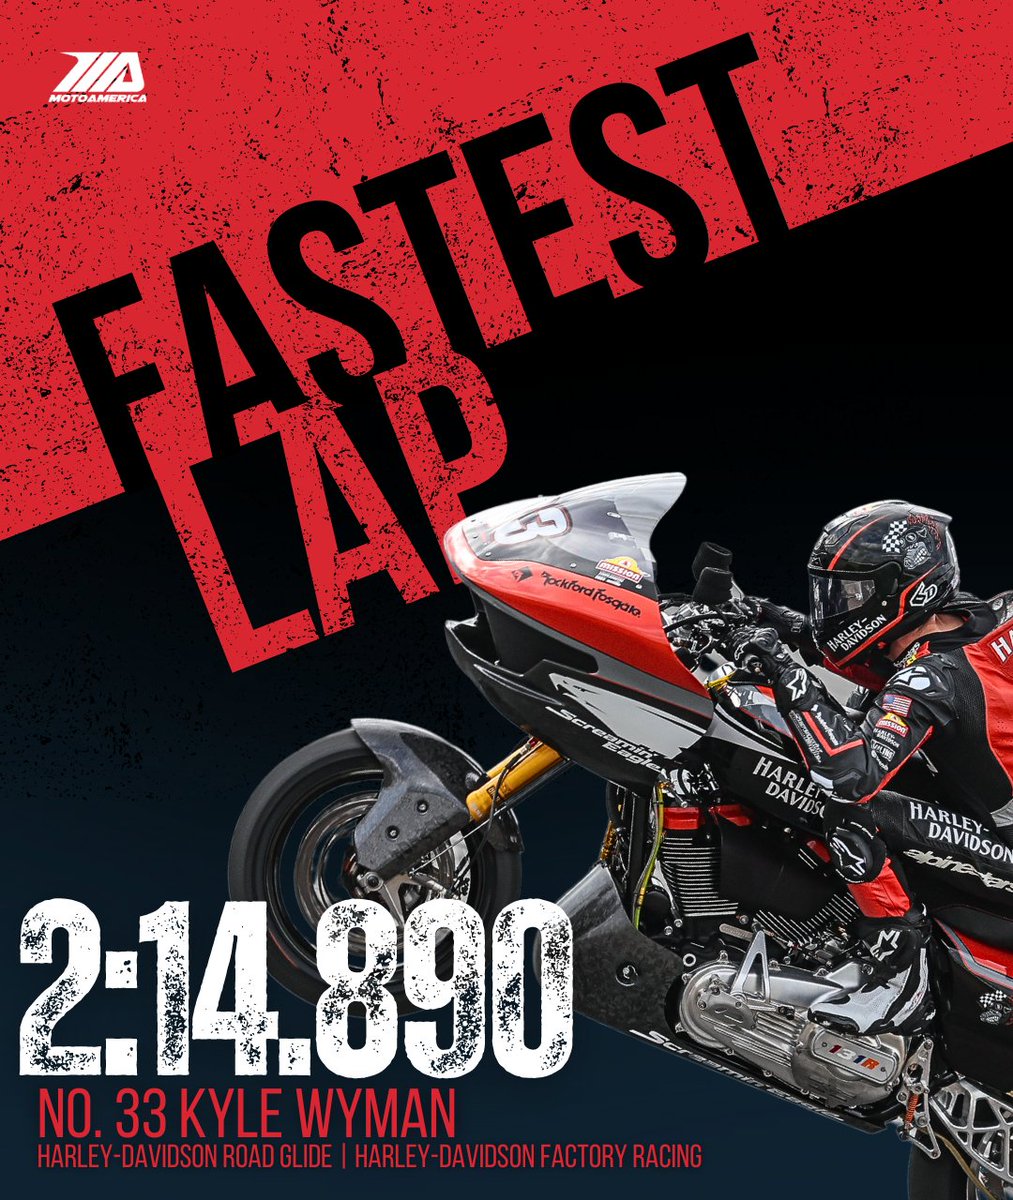 .@KyleWyman set a new track lap record at @COTA for the @MissionFoodsUS King Of The Baggers class. Fastest lap of the weekend! #MotoAmerica | #COTA | #KingOfTheBaggers | #Baggers | @harleydavidson